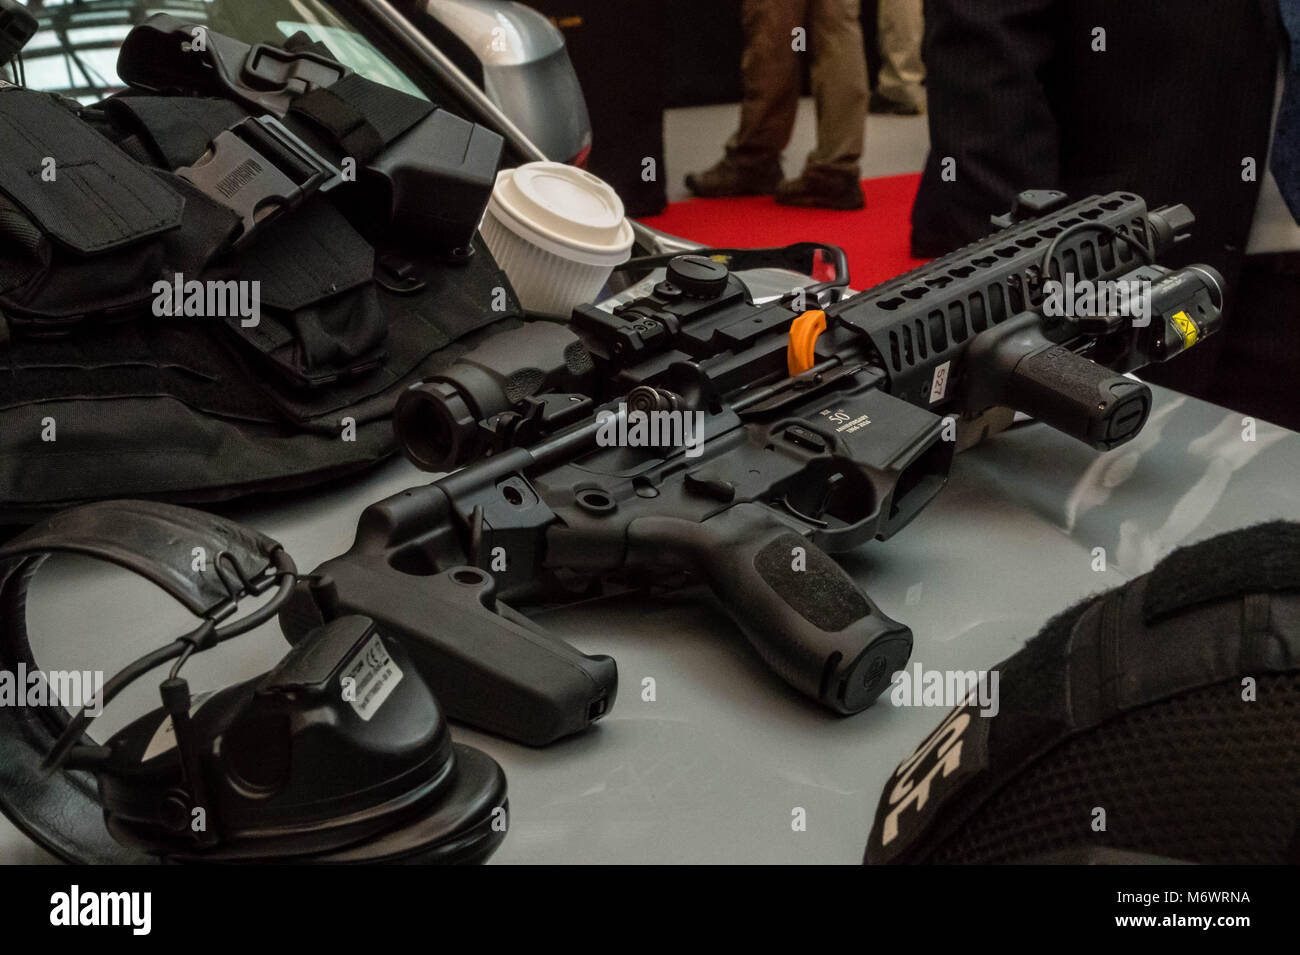 London, UK. 6th March 2018 Security and Counter Terror Expo, Metropolitan Police Armed Response team display their equipment, Coffee cups compulsory. Credit: Ian Davidson/Alamy Live News Stock Photo